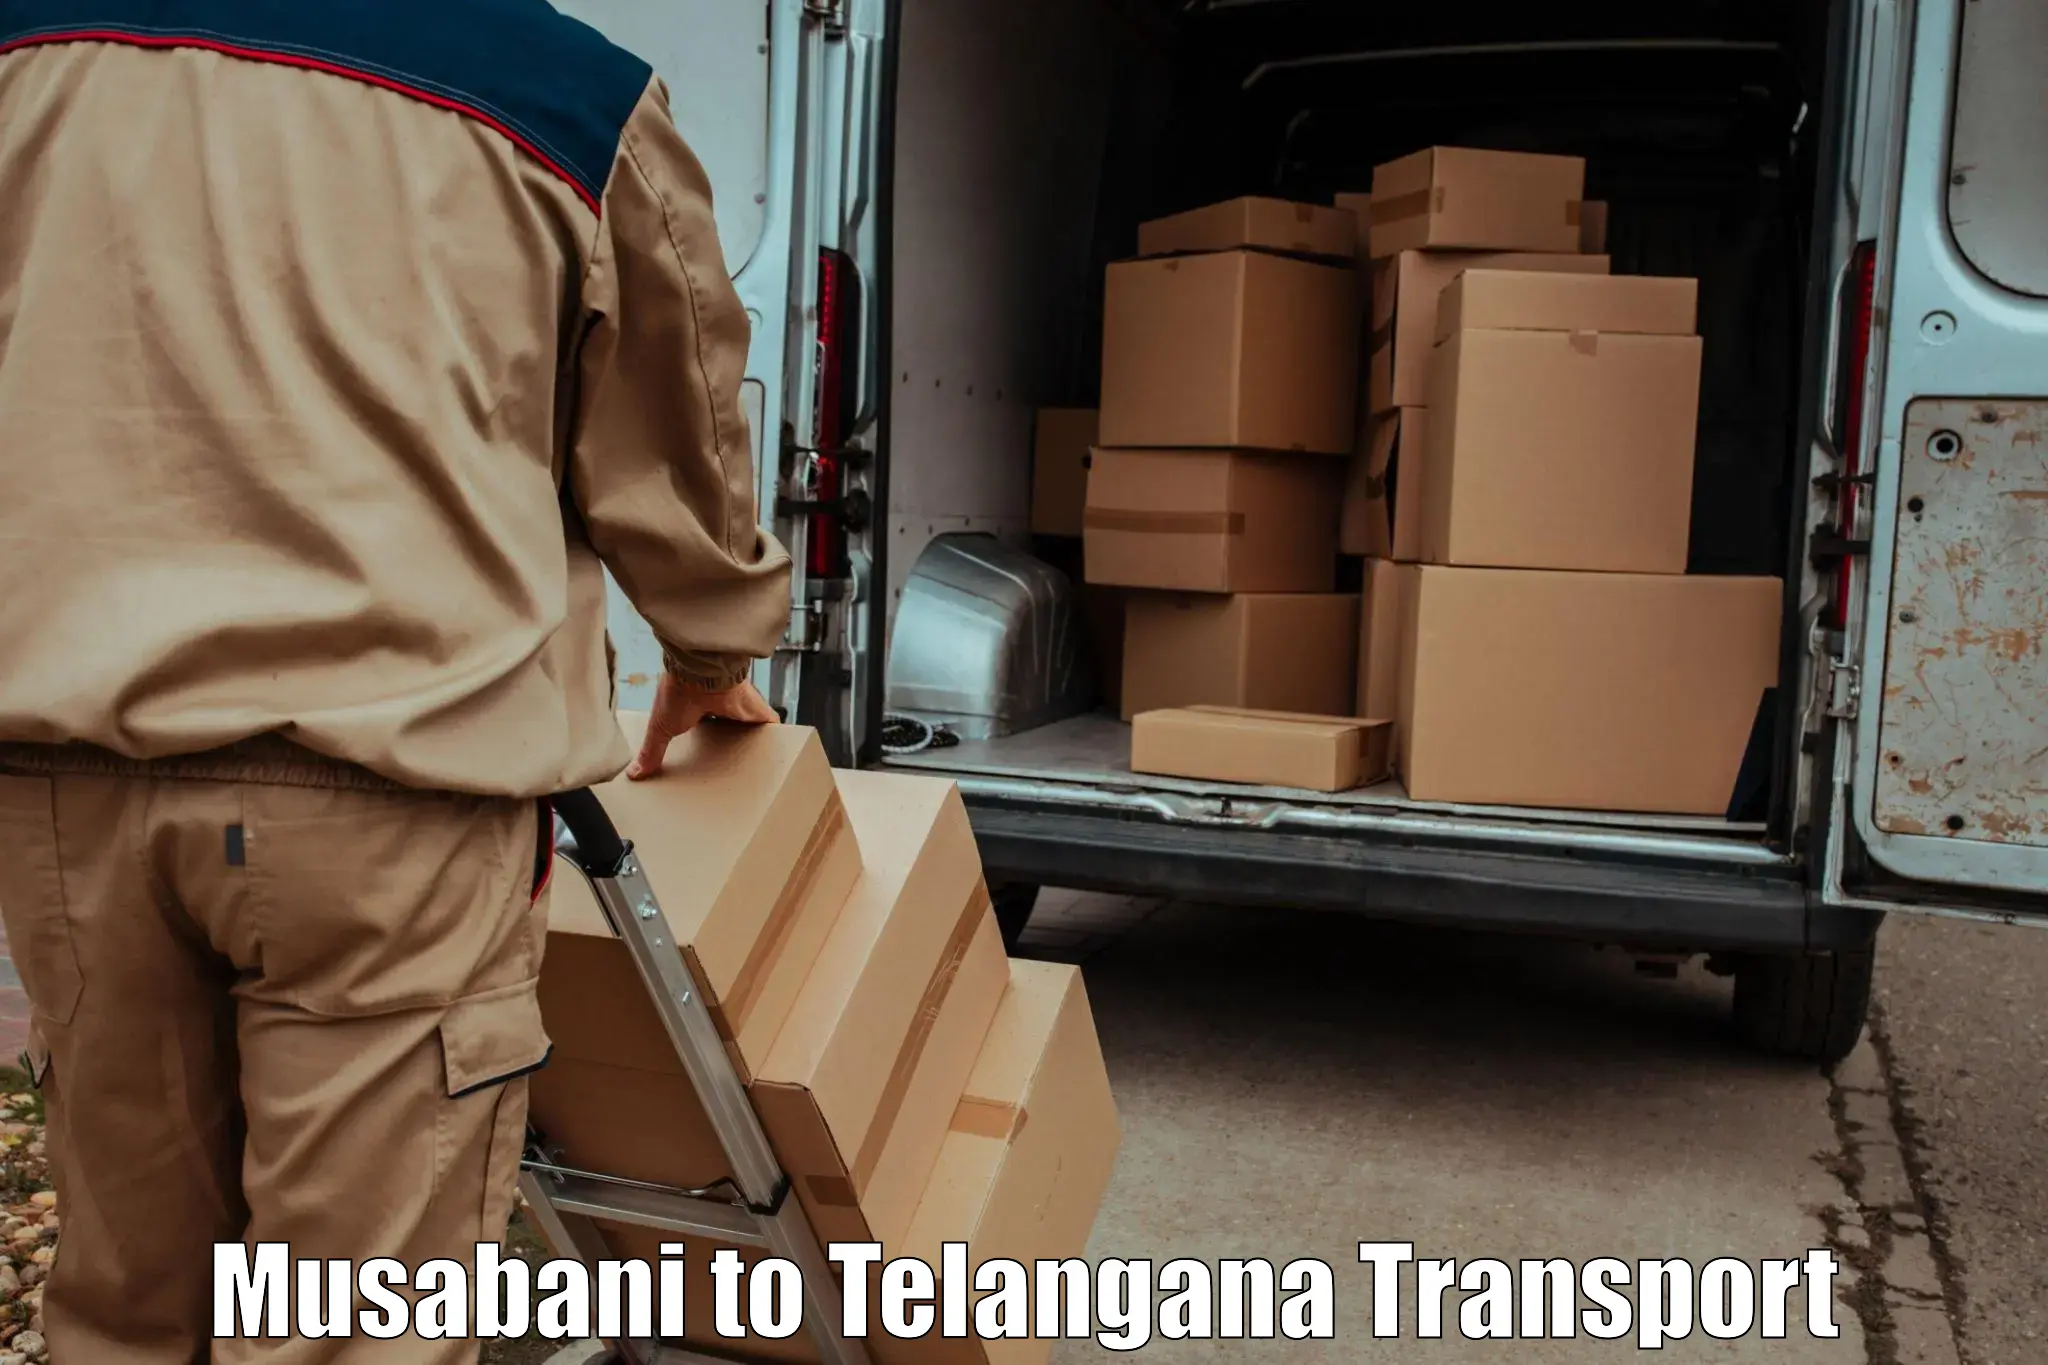 Nearby transport service in Musabani to Hyderabad